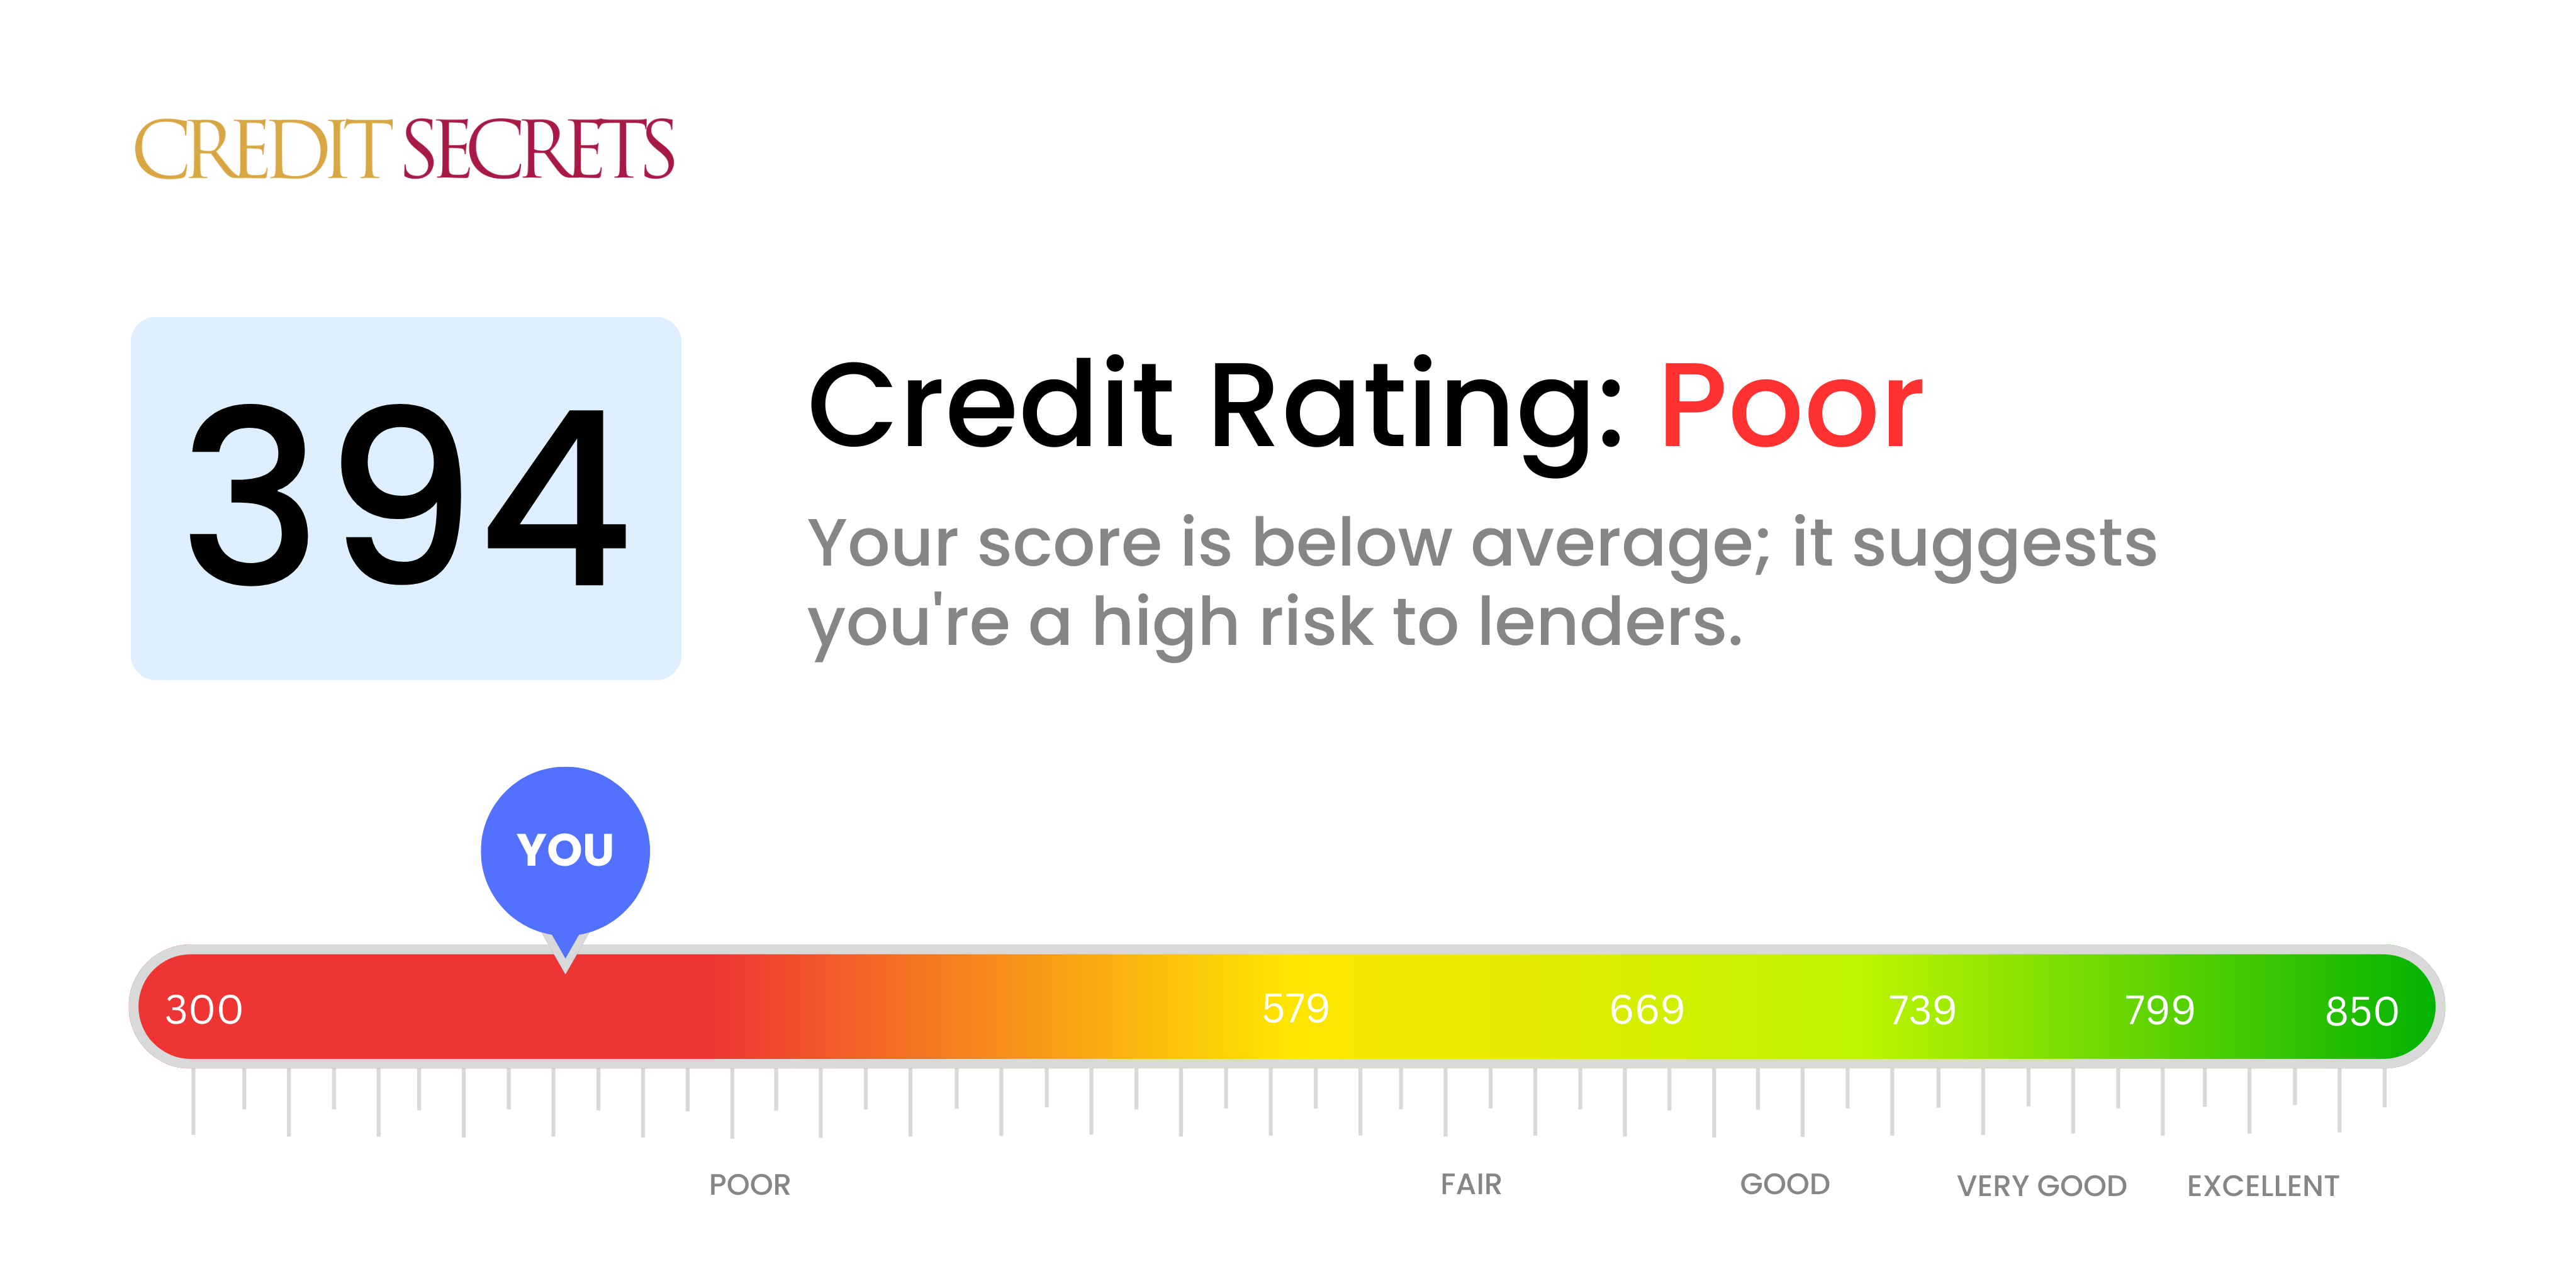 Is 394 a good credit score?